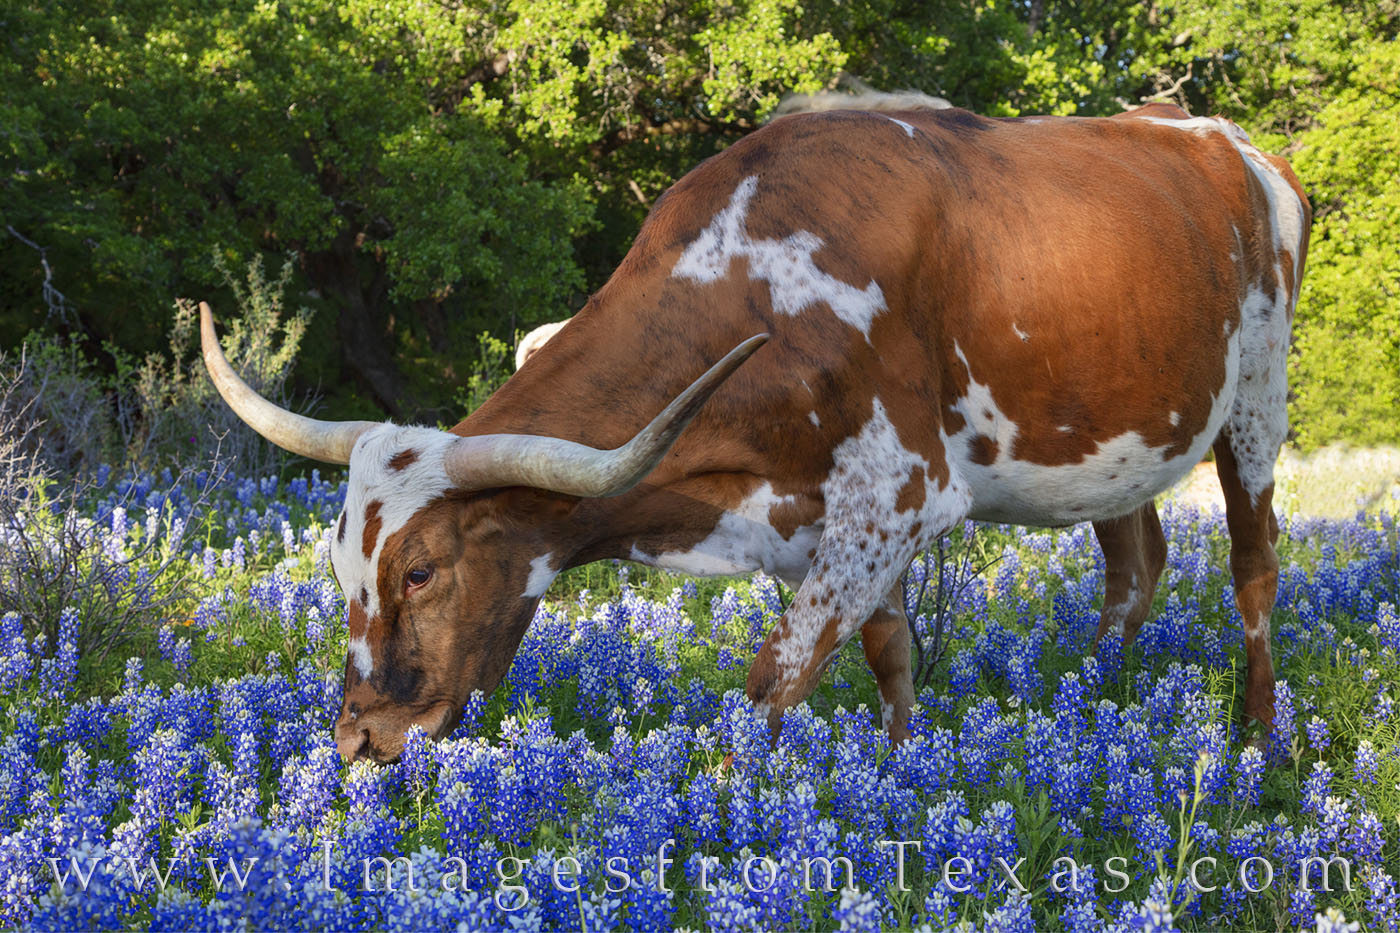 his longhorn was unperturbed by my presence as she grazed her way through the bluebonnets. I chanced upon this small group of...